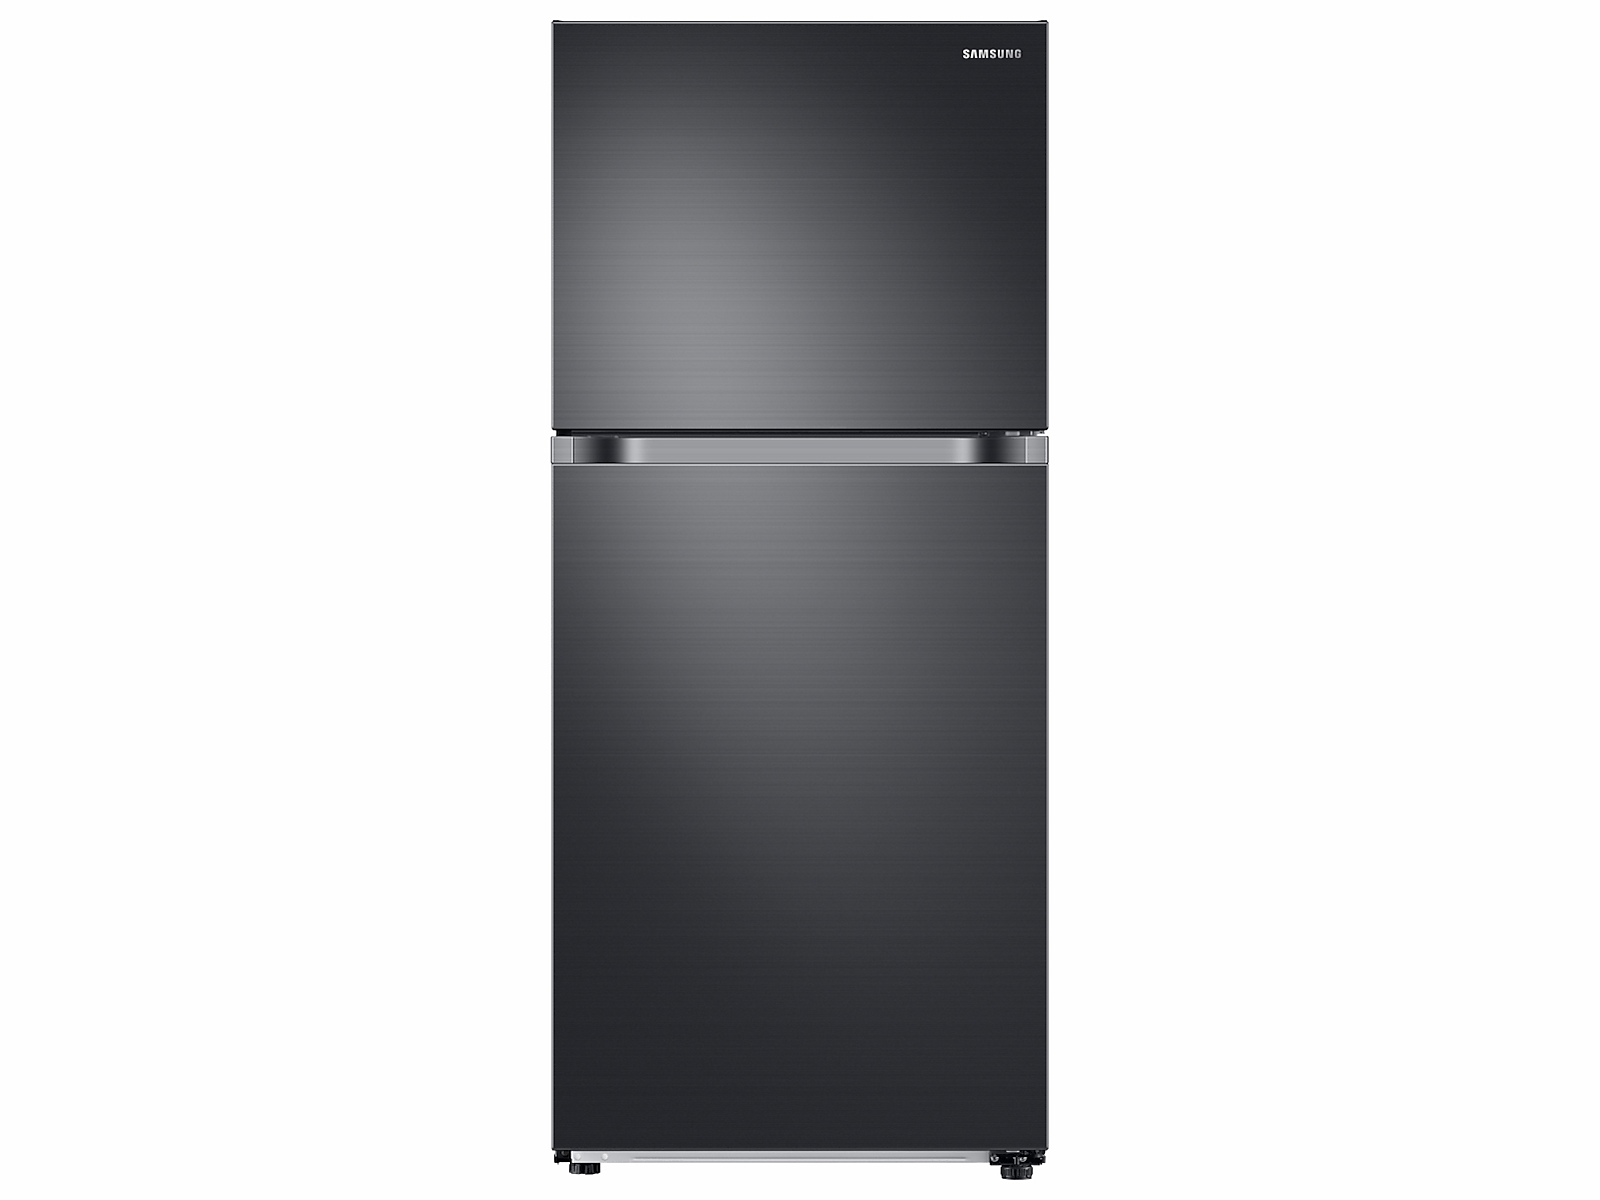 Samsung 18 cu. ft. Top Freezer Refrigerator with FlexZone™ in Black Stainless Steel(RT18M6213SG/AA) photo